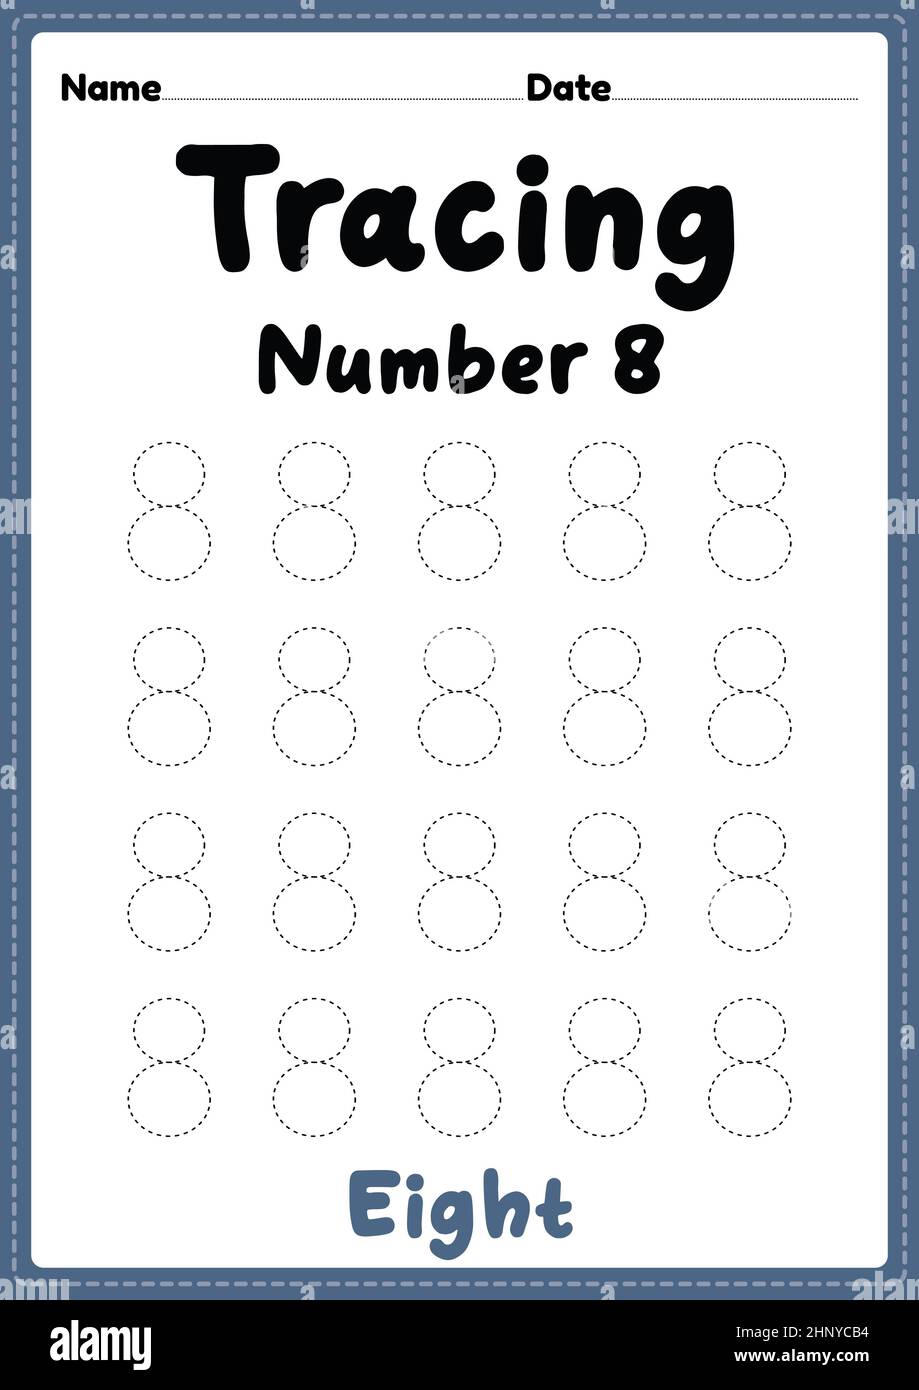 Tracing number 8 worksheet for kindergarten, preschool and Montessori kids for learning numbers and handwriting practice activities. Stock Photo